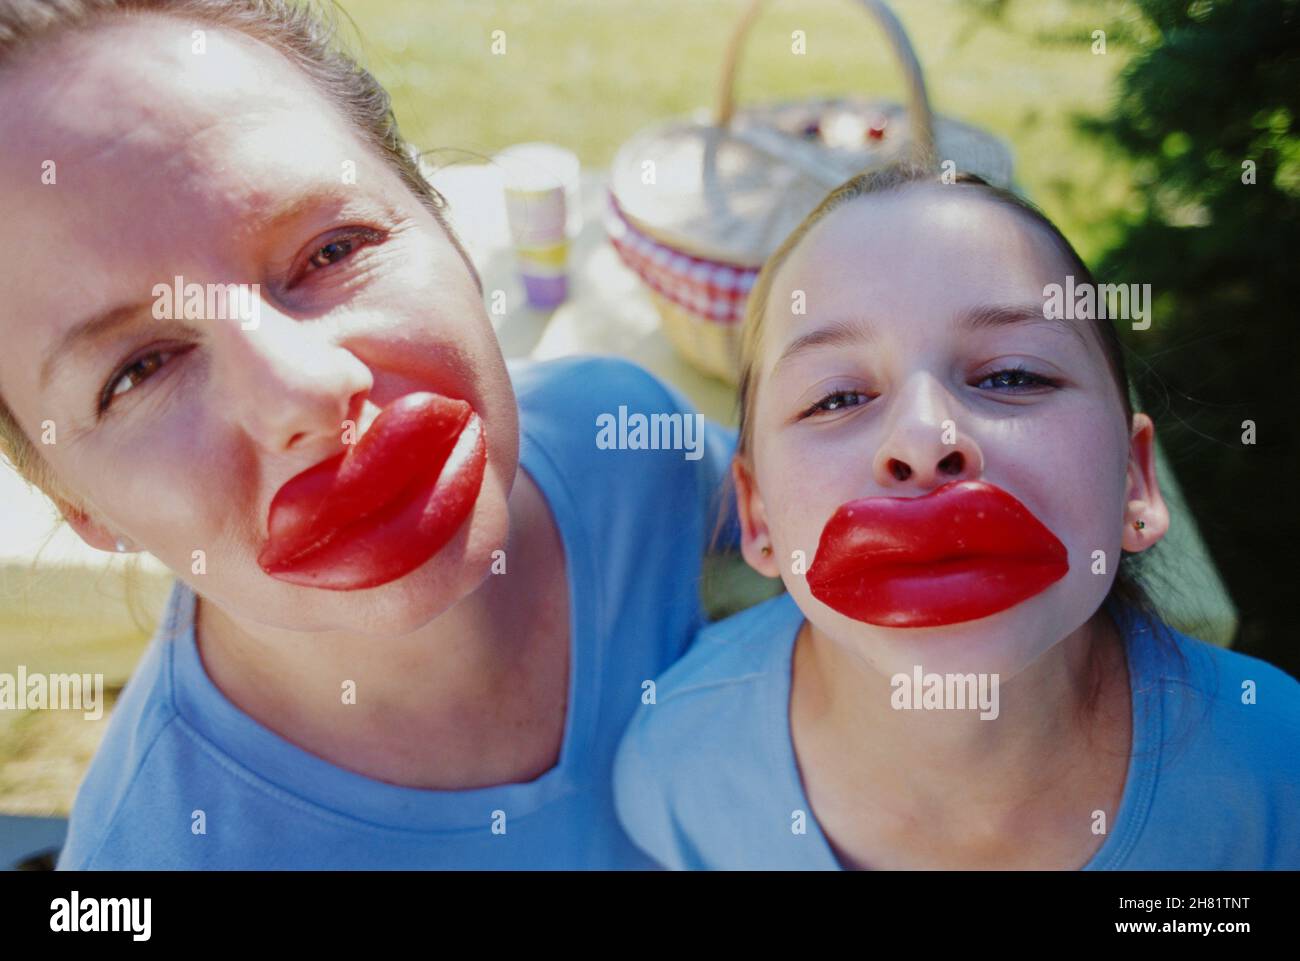 A Pair Of Edible Red Wax Candy Lips High-Res Stock Photo - Getty Images